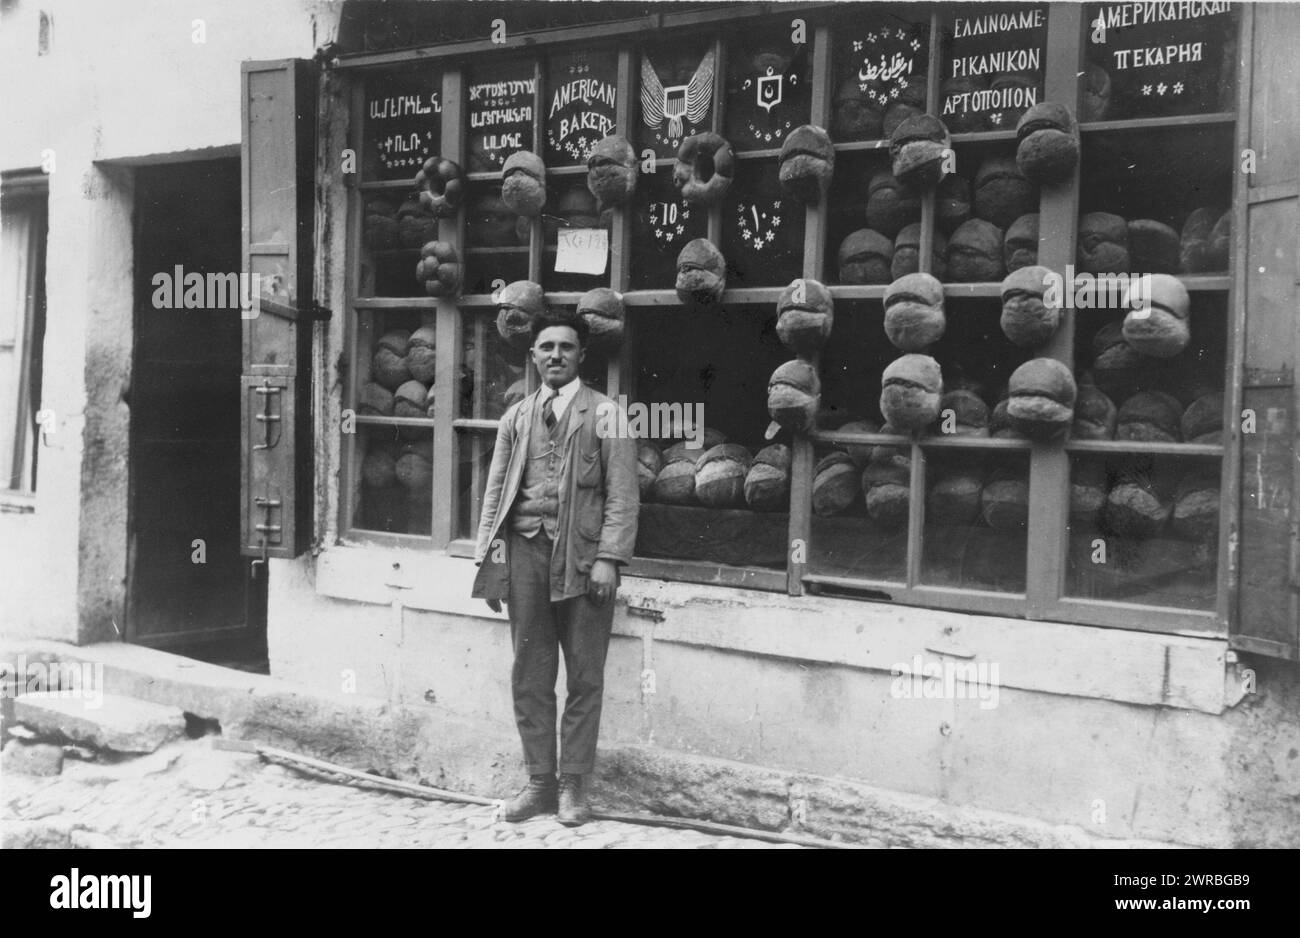 Baker standing in front of the 'American Bakery' which displays signs in Armenian, Ladino (in Hebrew characters), English, Ottoman Turkish, Greek and Russian with samples of bread attached to the mullions, Ortakoy, Istanbul, Turkey, photo by cdm., Carpenter, Frank G. (Frank George), 1855-1924, collector, 1922 June., Bakeries, Turkey, Istanbul, 1910-1920, Photographic prints, 1910-1920., Portrait photographs, 1910-1920, Photographic prints, 1910-1920, 1 photographic print Stock Photo